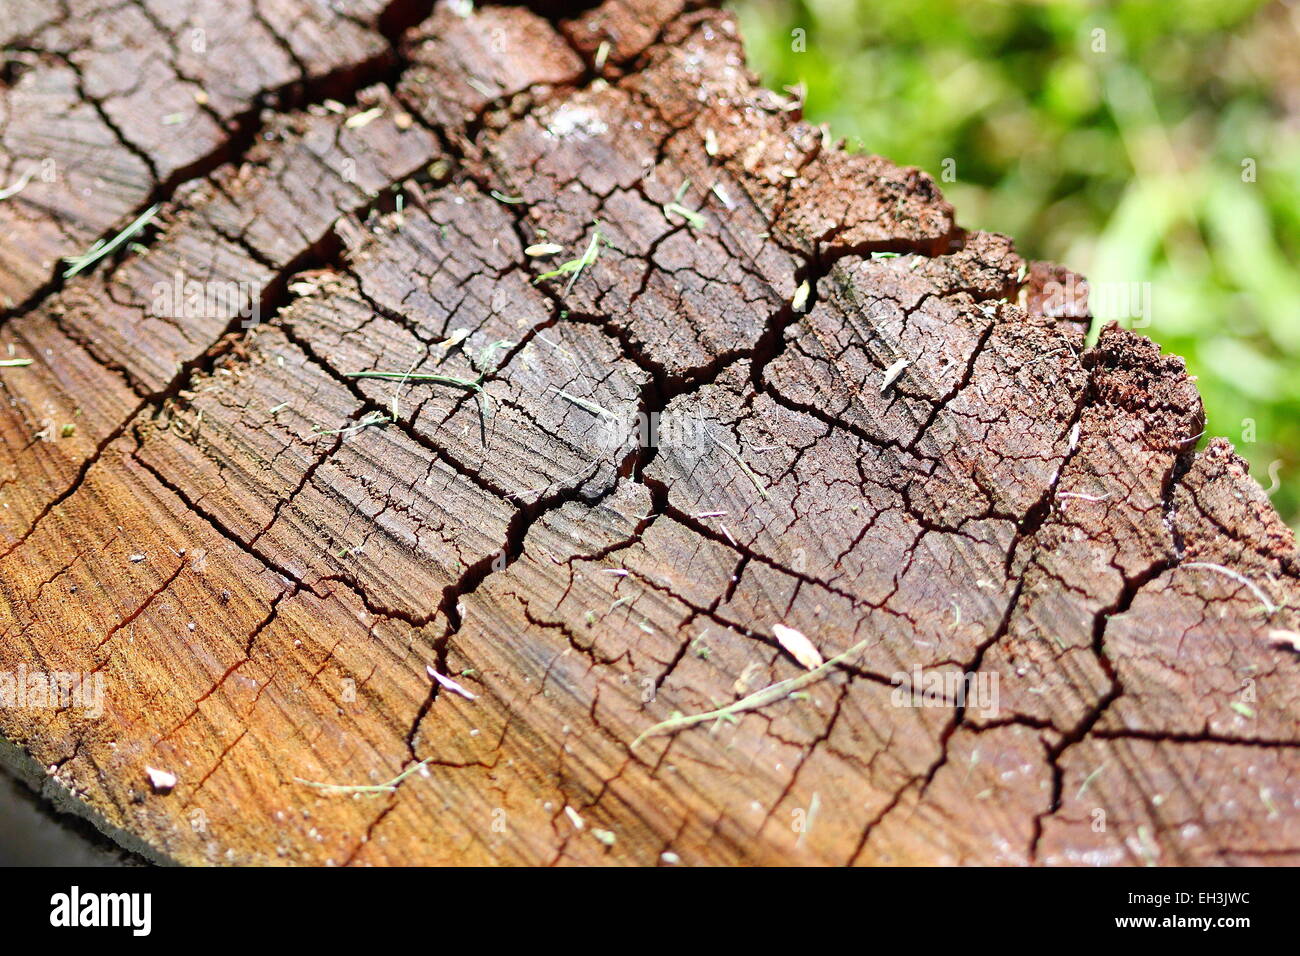 Close up of a broken log showing the details of the cracked surface Stock Photo